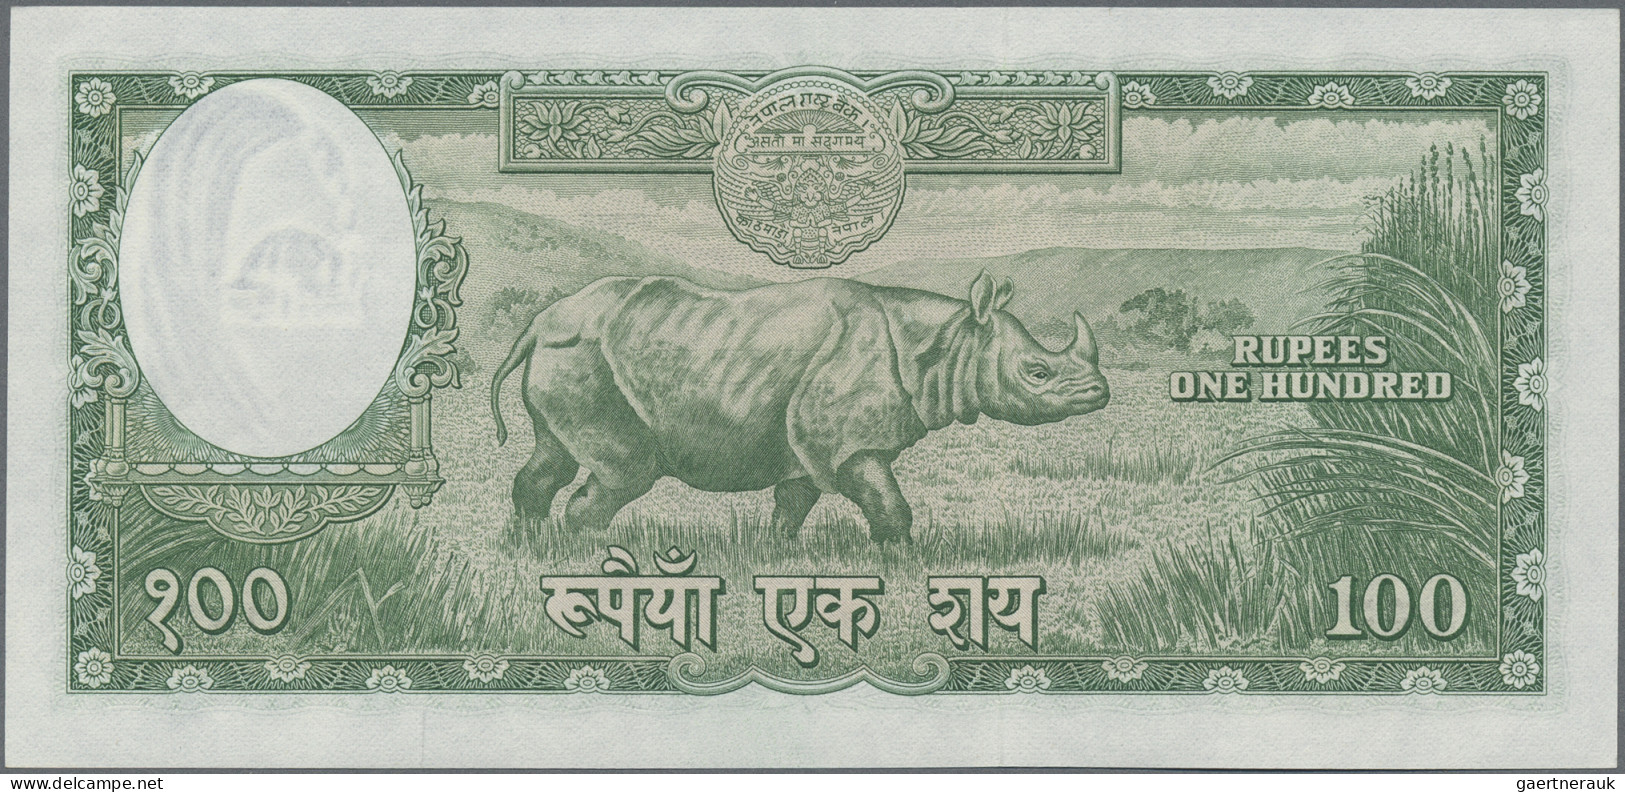 Nepal: Nepal Rastra Bank, lot with 1 and 5 Mohru 1960 and 5, 10 and 100 Rupees 1